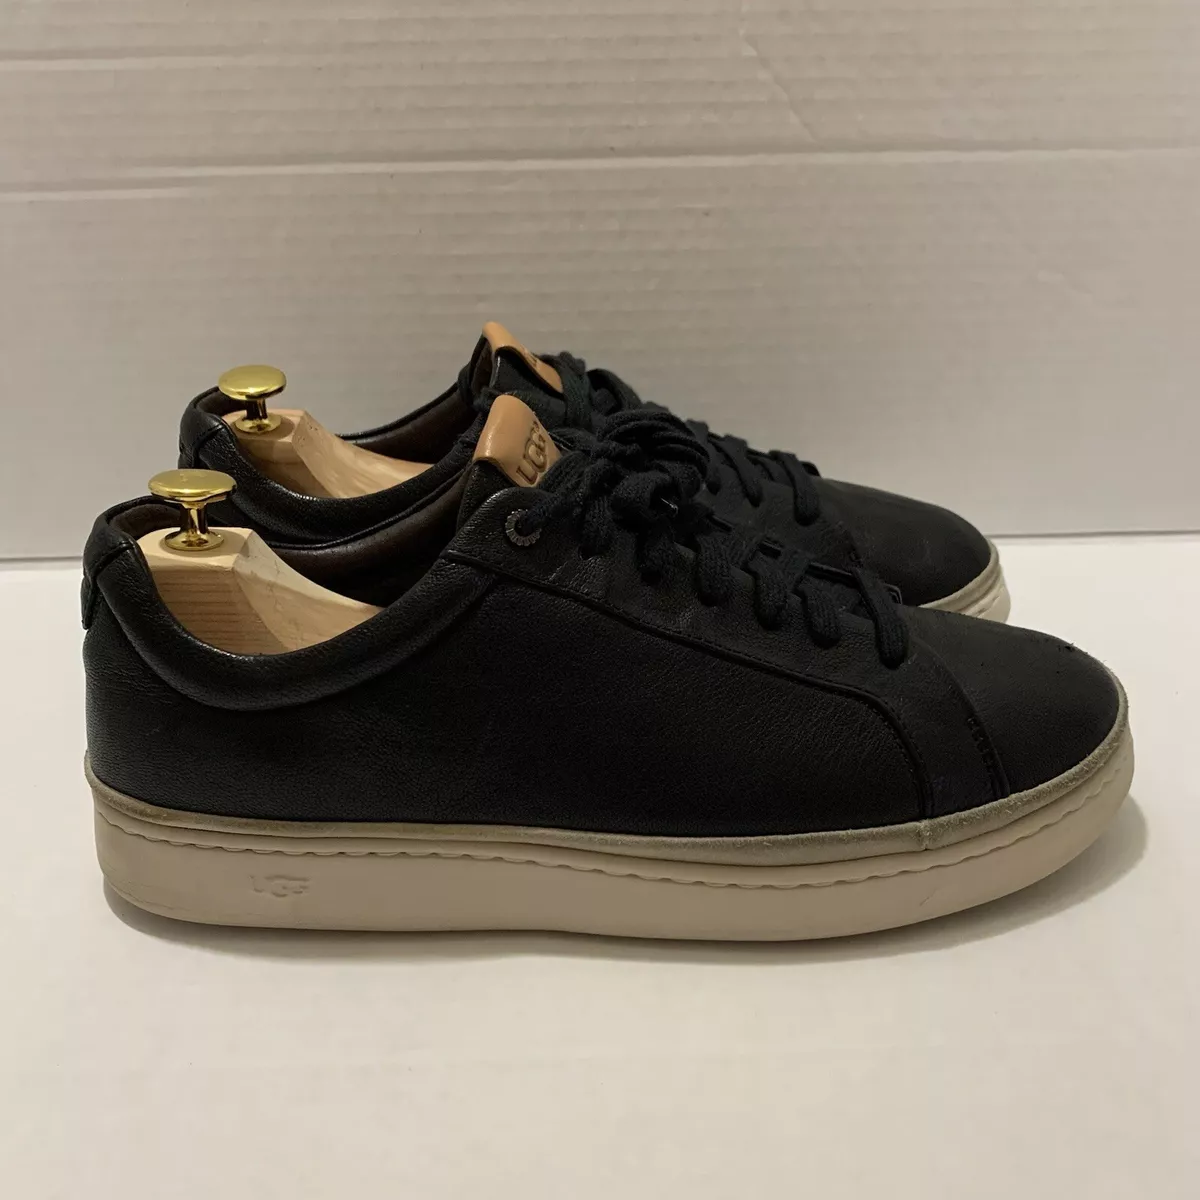 Michael Kors Leather Sneakers | Leather sneakers, Leather, Michael kors